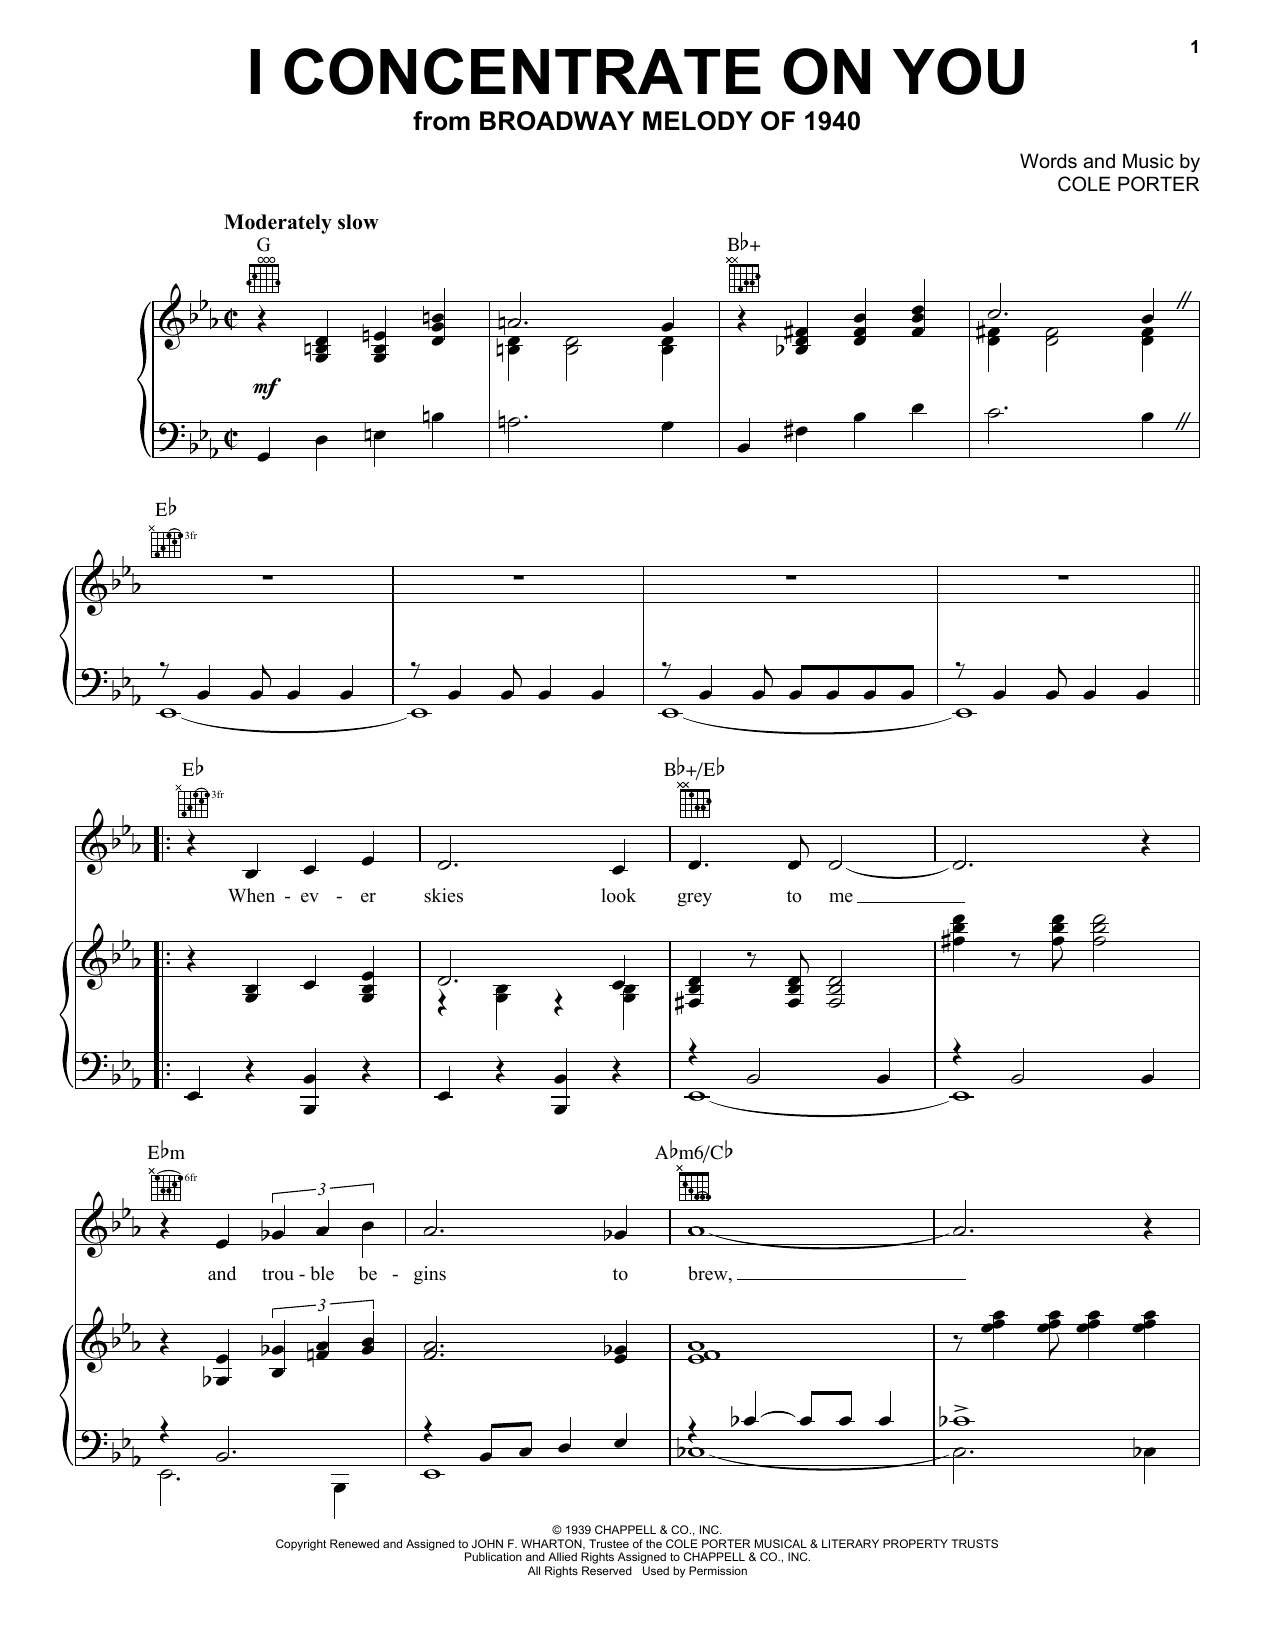 Download Frank Sinatra I Concentrate On You Sheet Music